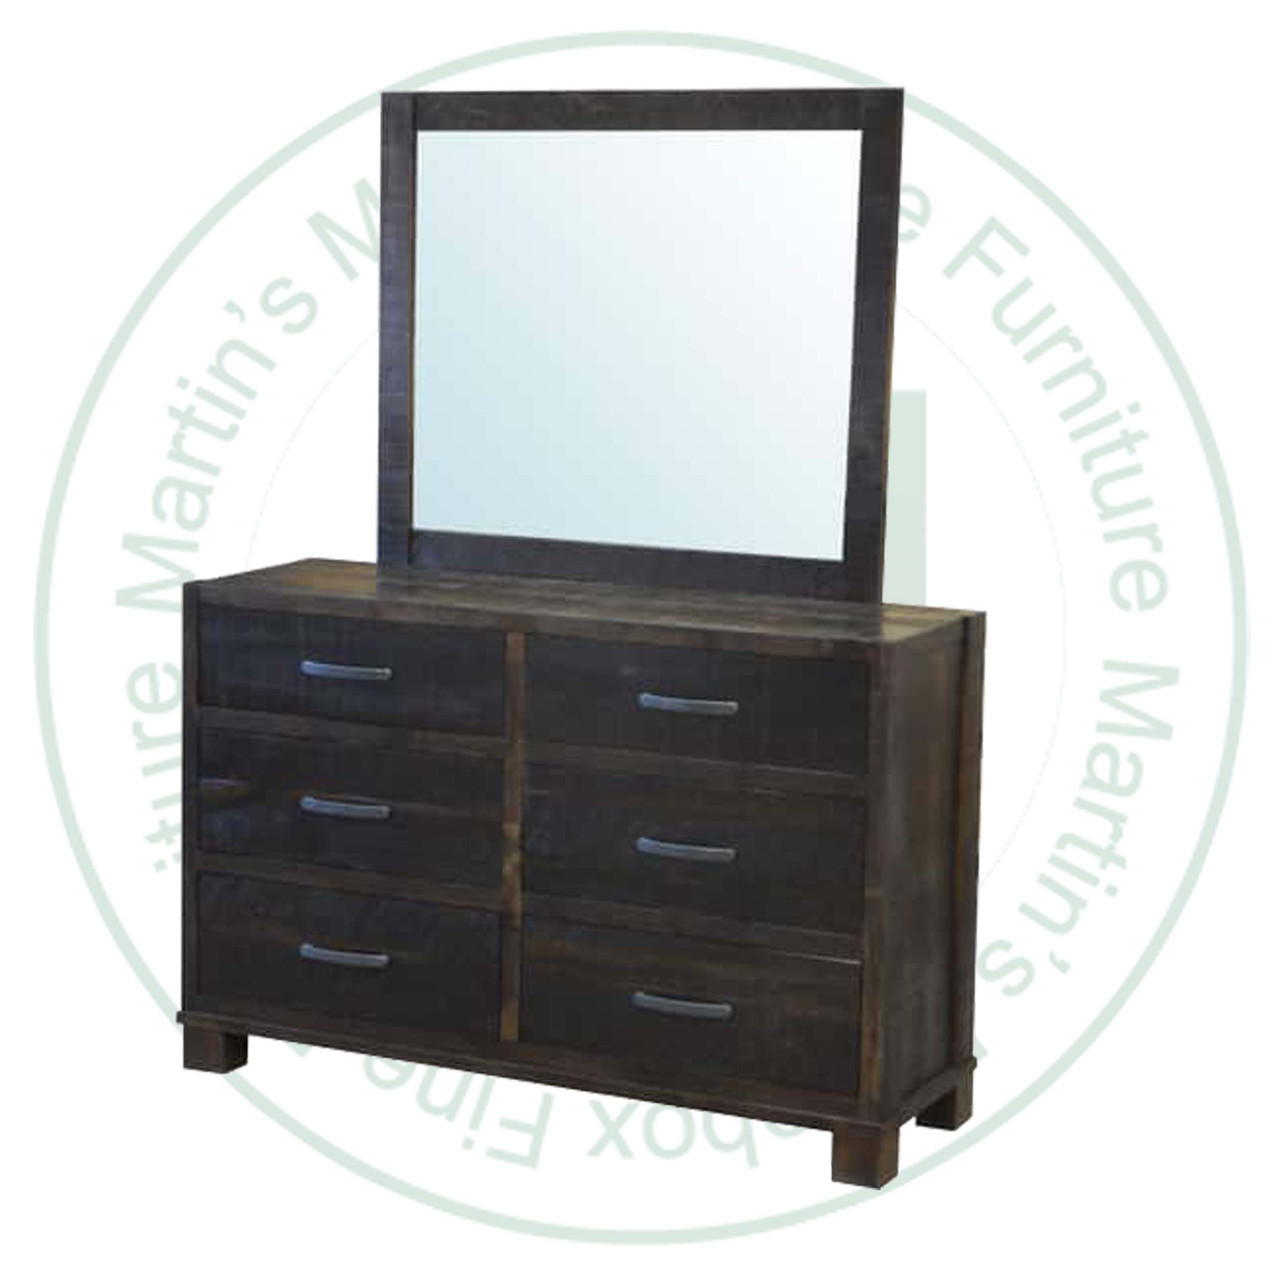 Pine Backwoods Millsawn Dresser 18''D x 54.5''W x 36''H With 6 Drawers